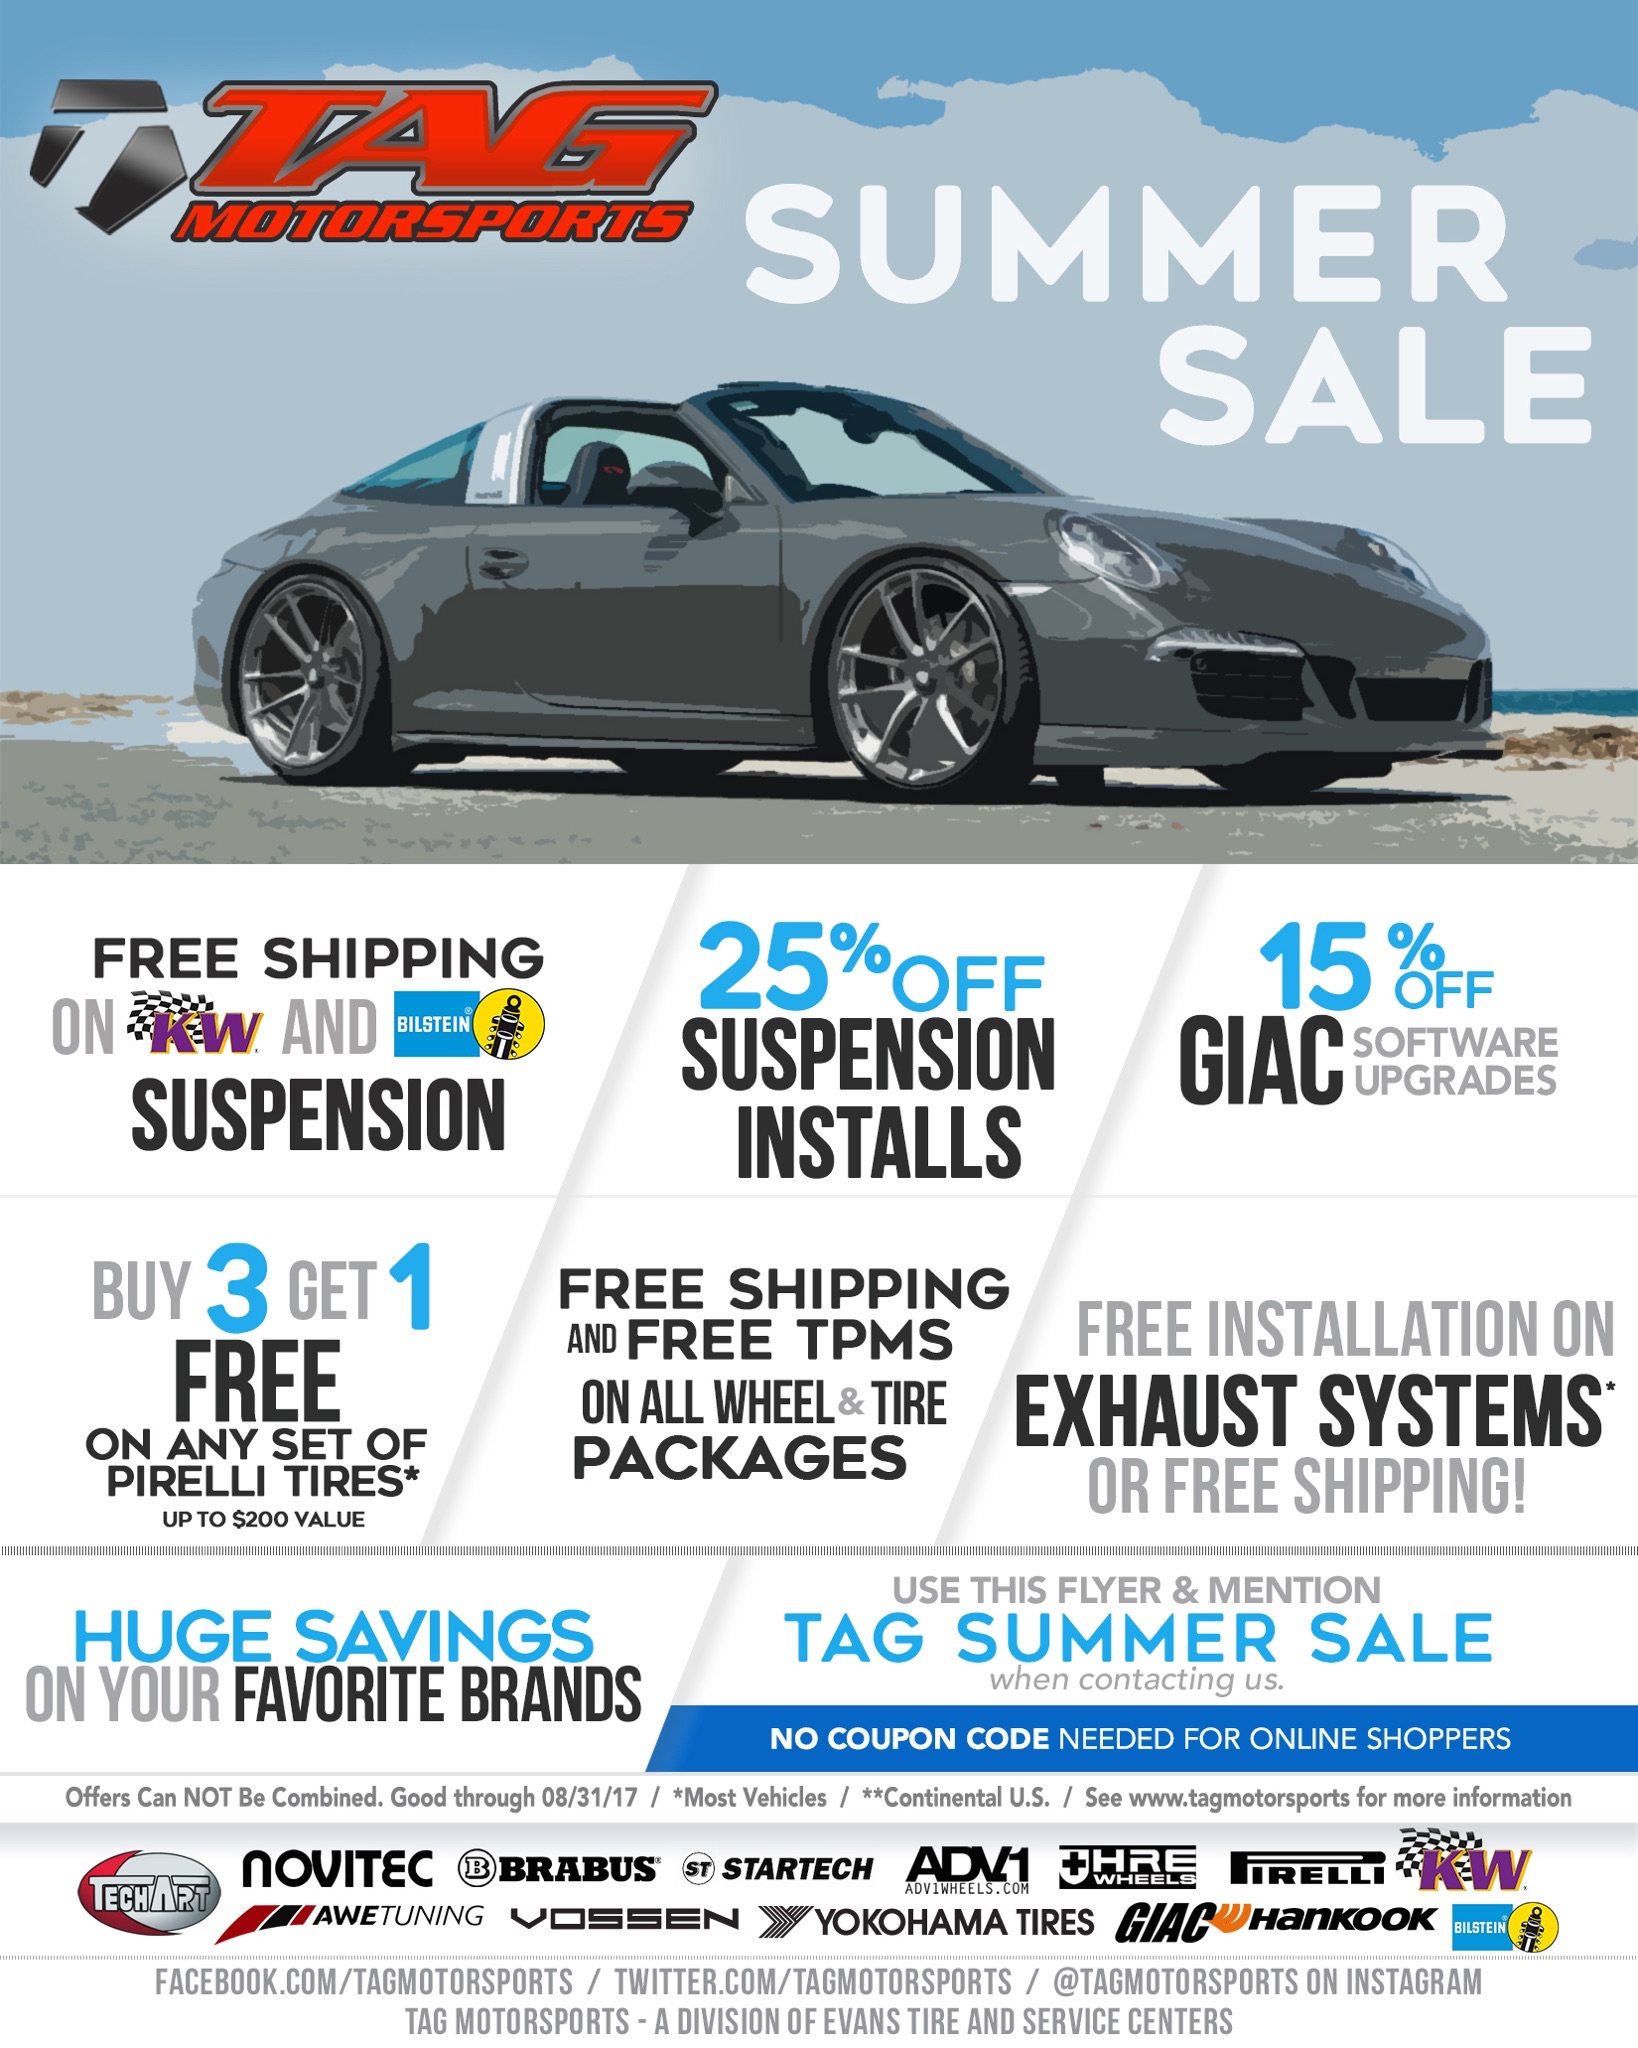 TAG 2017 Summer Sale is HERE!